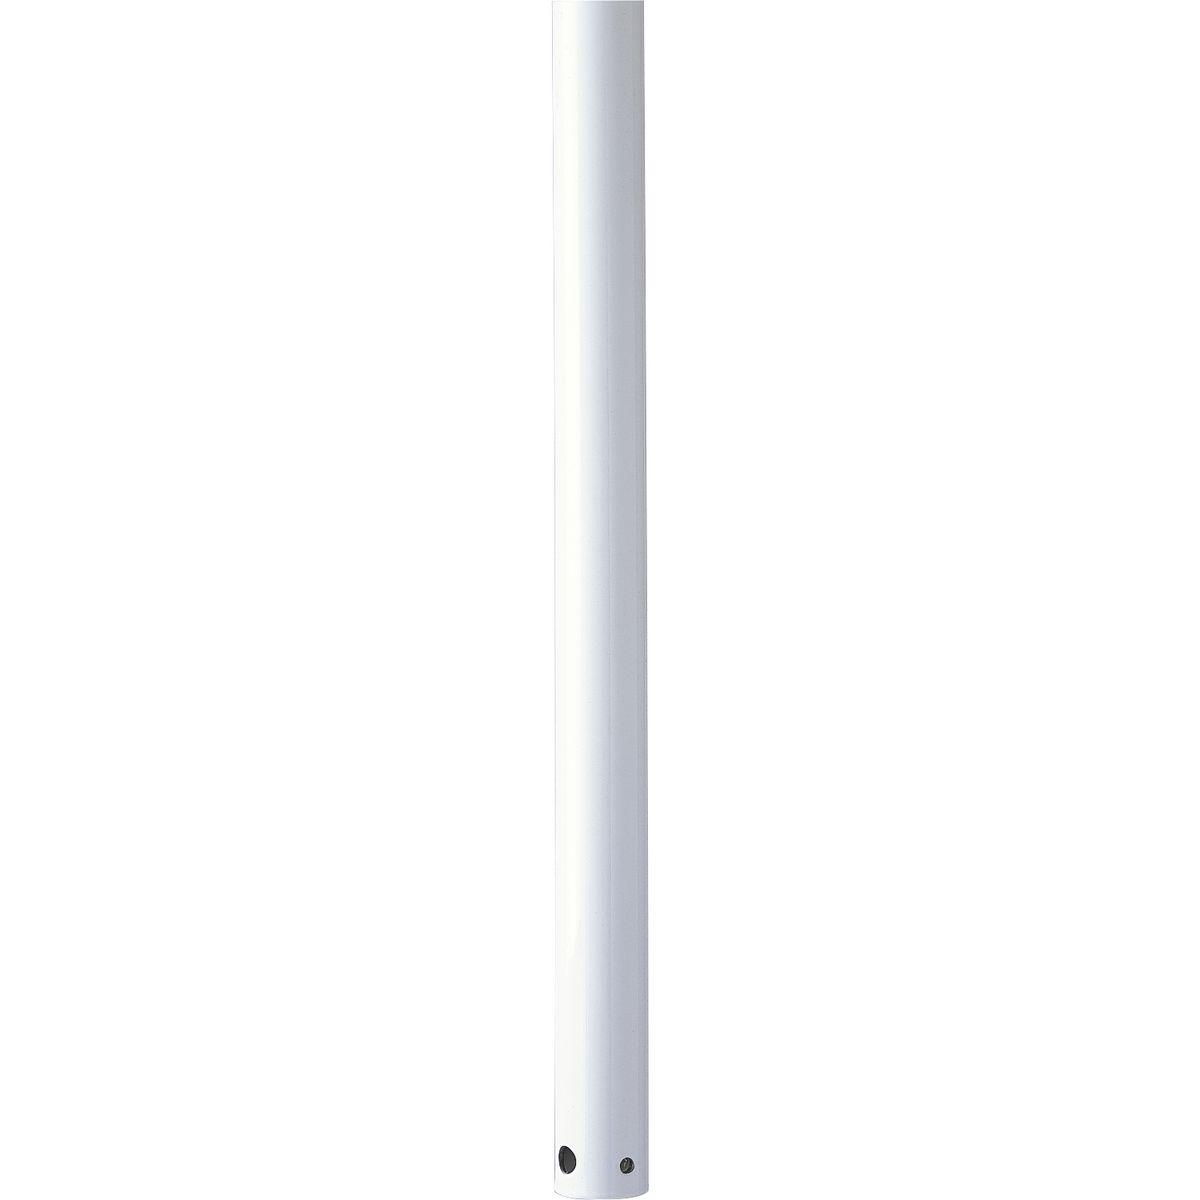 Hubbell P2606-28 3/4 In. x 36 In. downrod for use with any Progress Lighting ceiling fan. Use of a fan downrod positions your ceiling fan at the optimal height for air circulation and provides the perfect solution for installation on high cathedral ceilings or in great ro